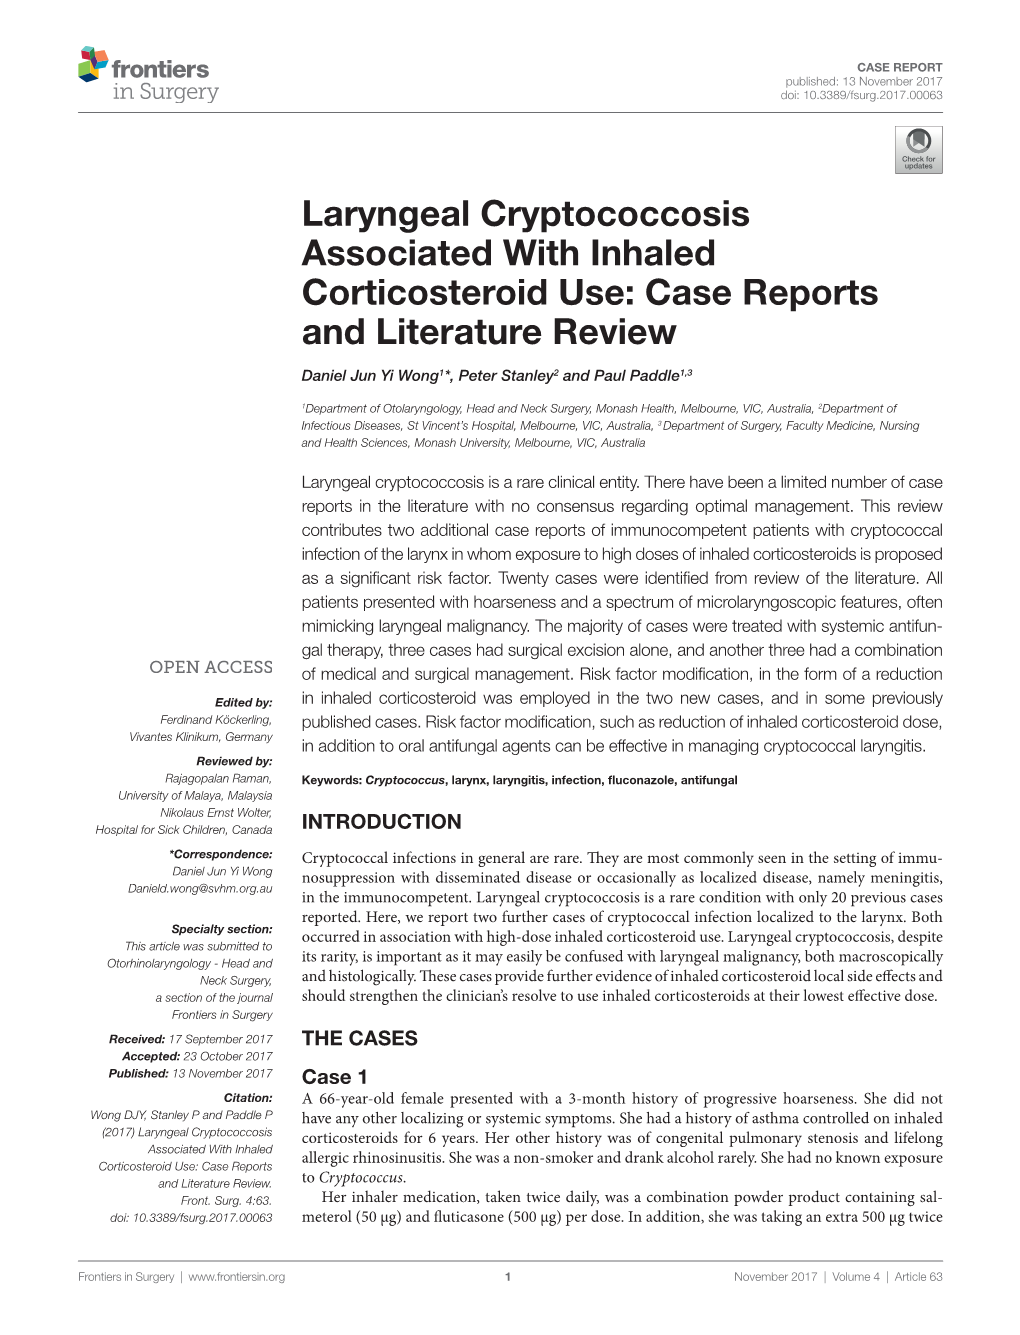 Laryngeal Cryptococcosis Associated with Inhaled Corticosteroid Use: Case Reports and Literature Review